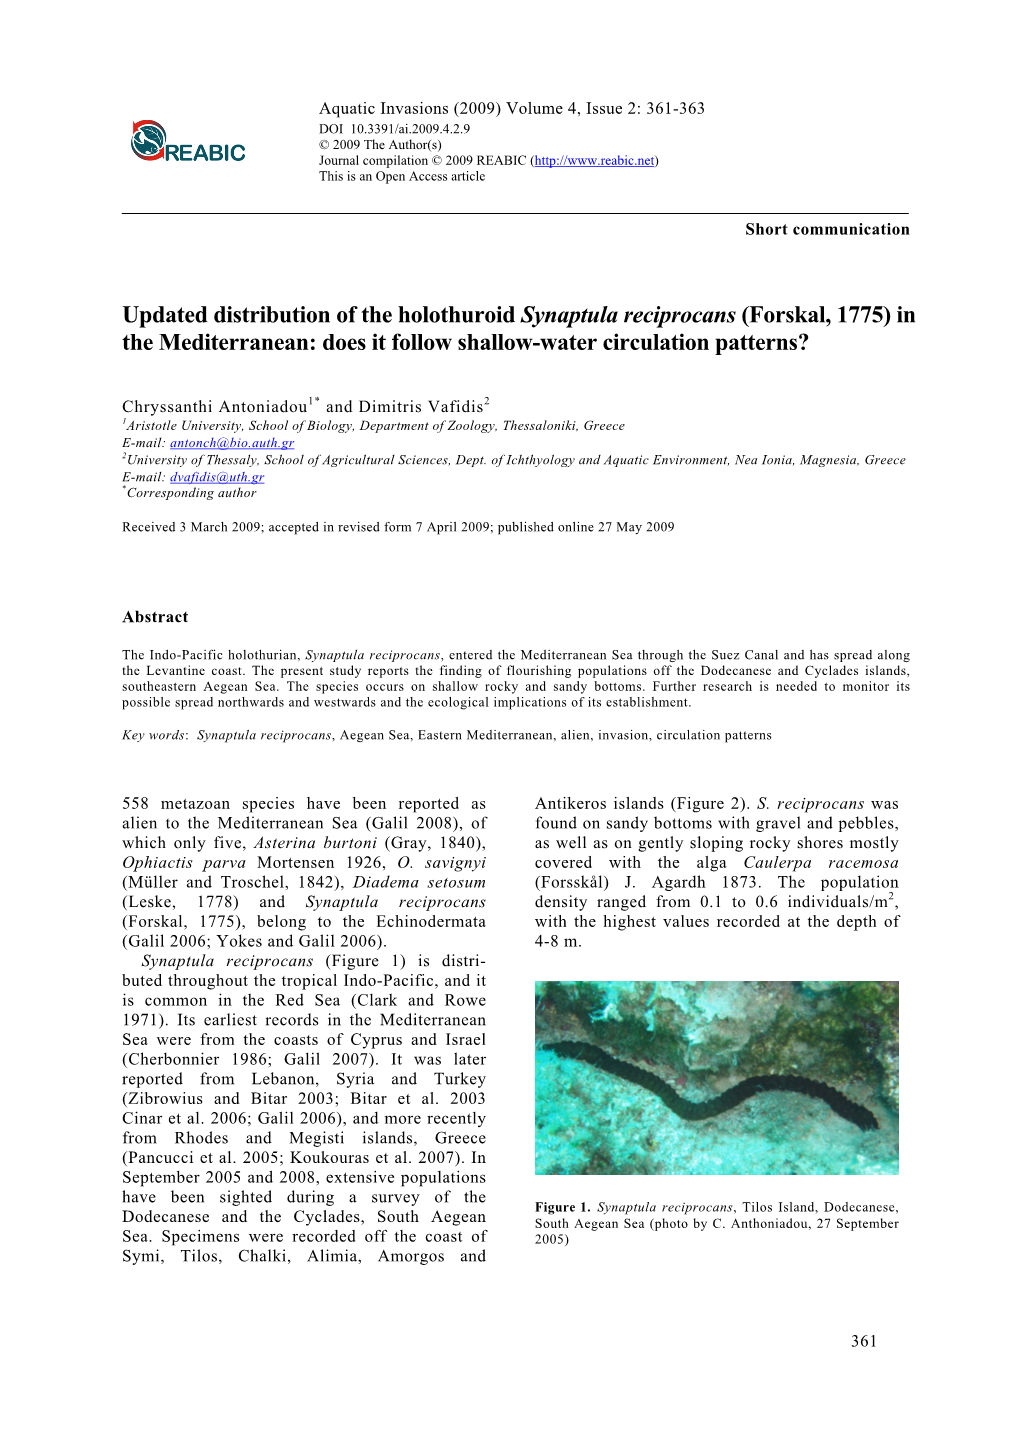 Updated Distribution of the Holothuroid Synaptula Reciprocans (Forskal, 1775) in the Mediterranean: Does It Follow Shallow-Water Circulation Patterns?